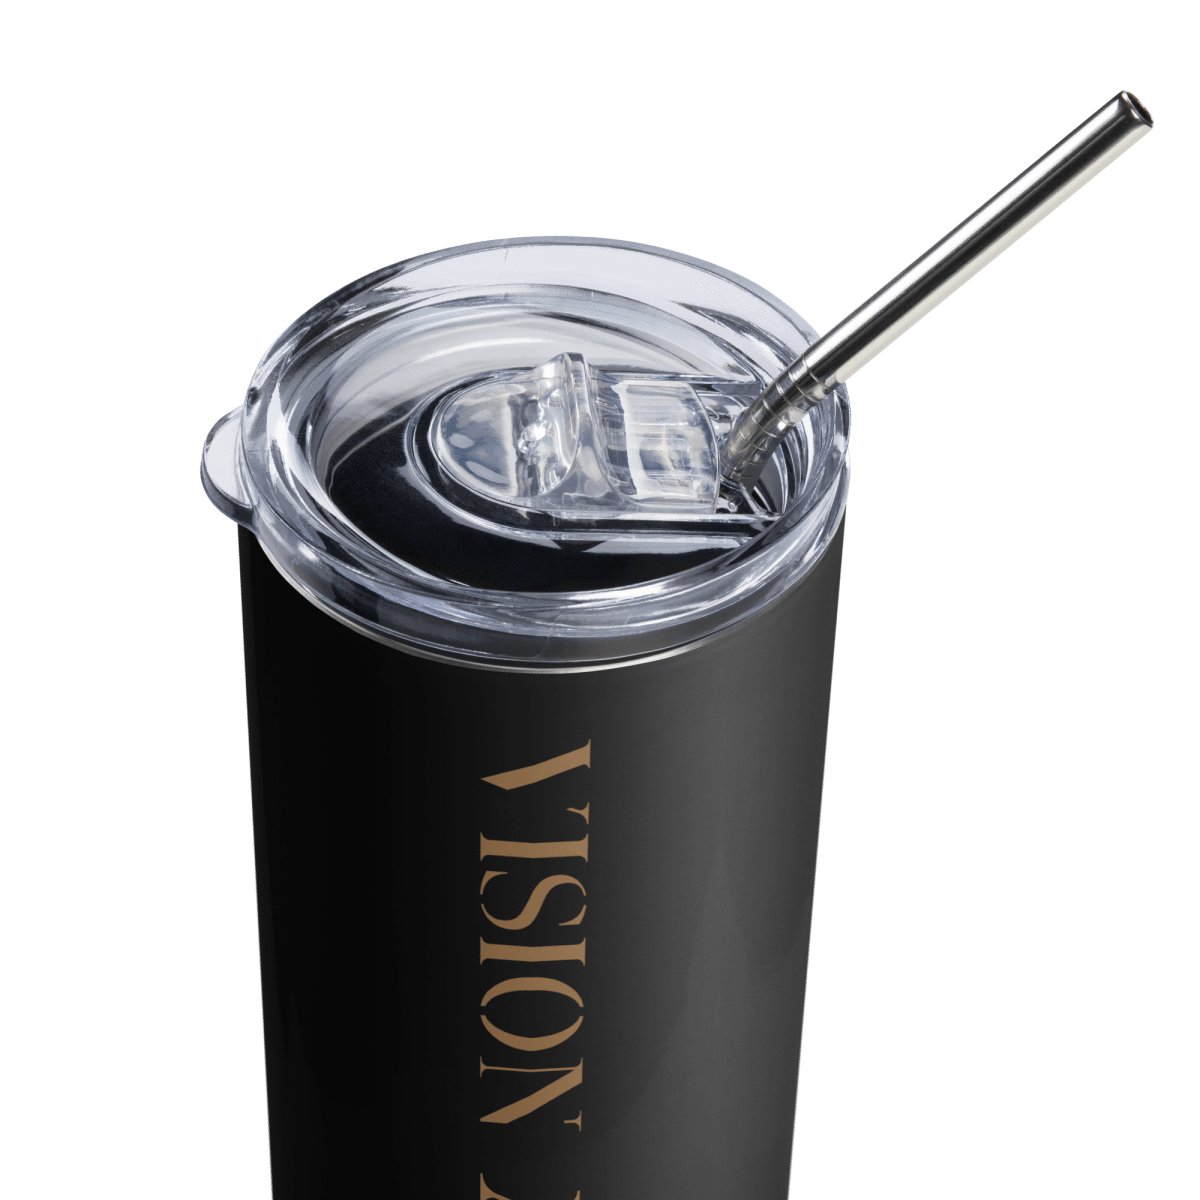 Vision Apparel Inc stainless steel tumbler - Vision Apparel Inc.